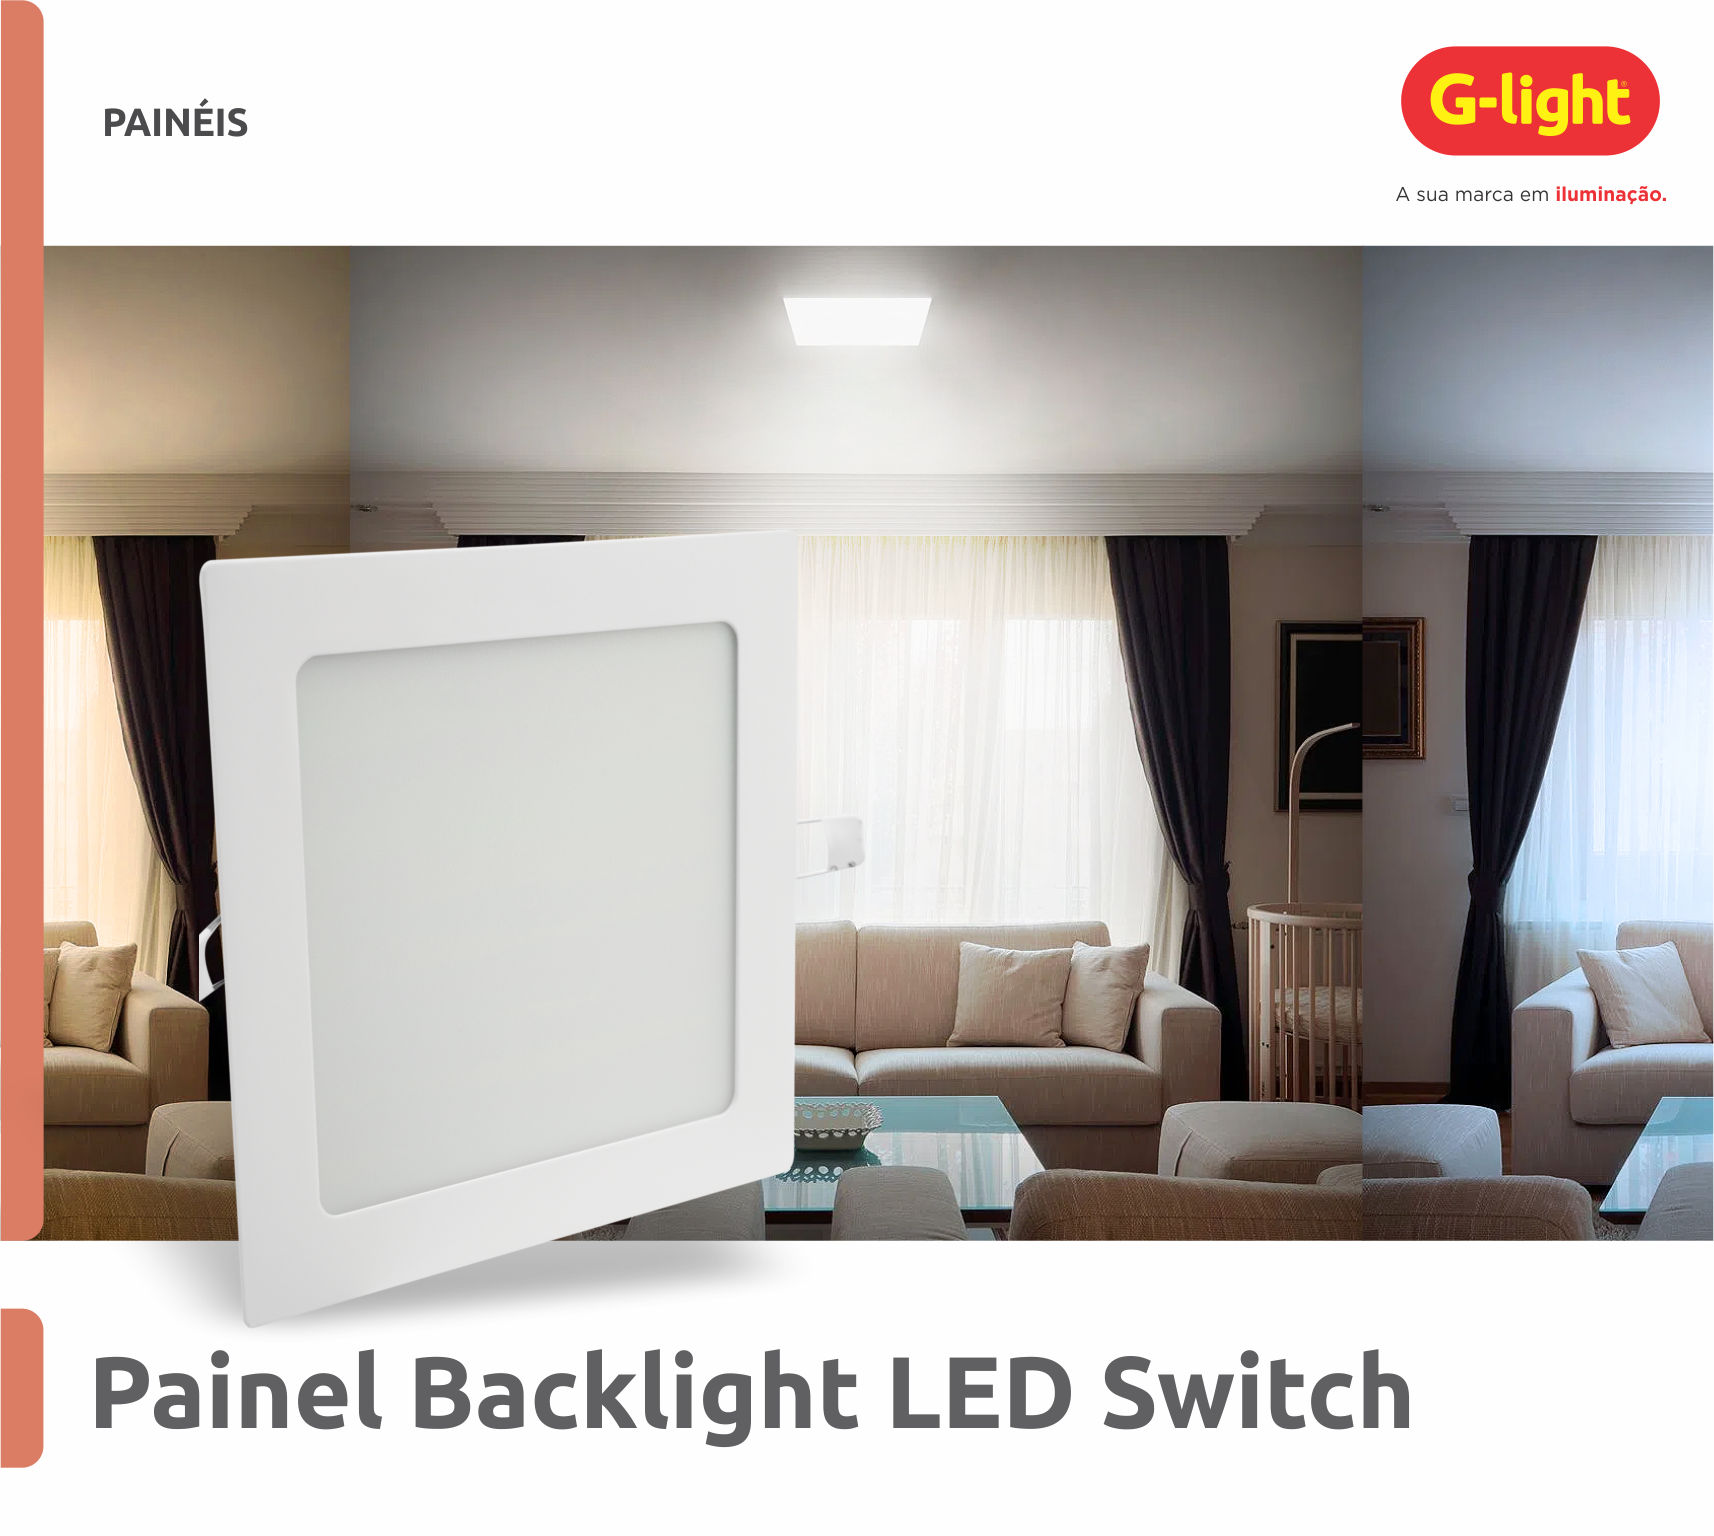 Painel Backlight LED Switch